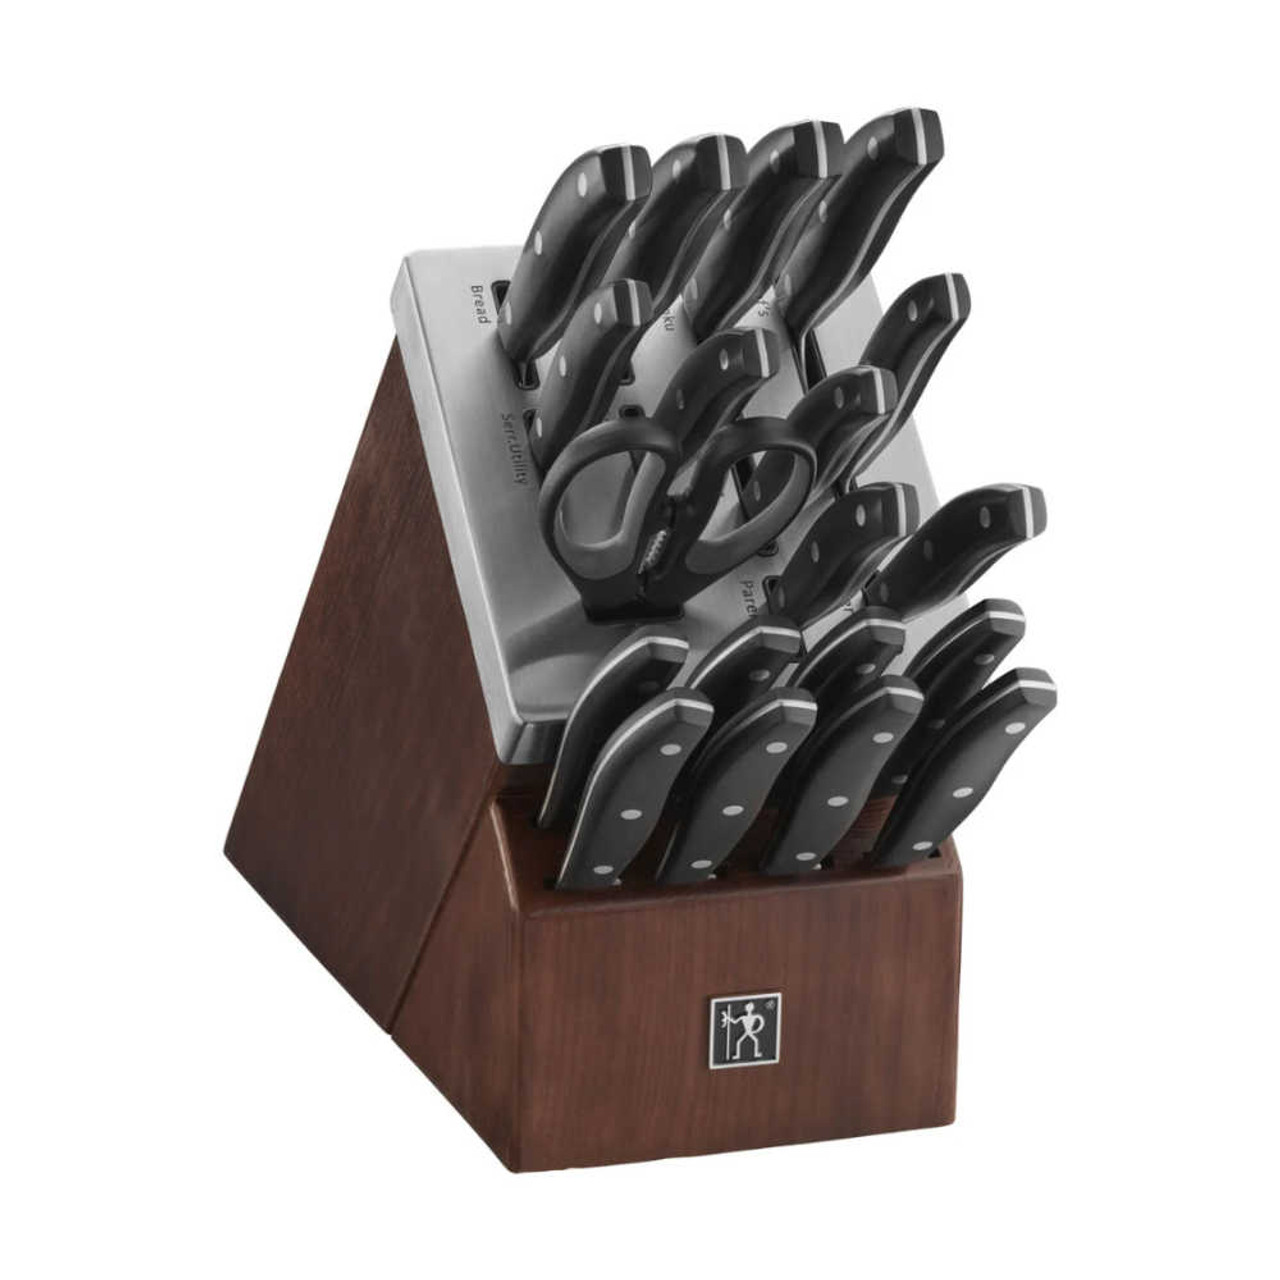 https://cdn11.bigcommerce.com/s-hccytny0od/images/stencil/1280x1280/products/5176/22365/Henckels_Definition_20-Piece_Self-Sharpening_Knife_Block_Set__75677.1668892057.jpg?c=2?imbypass=on